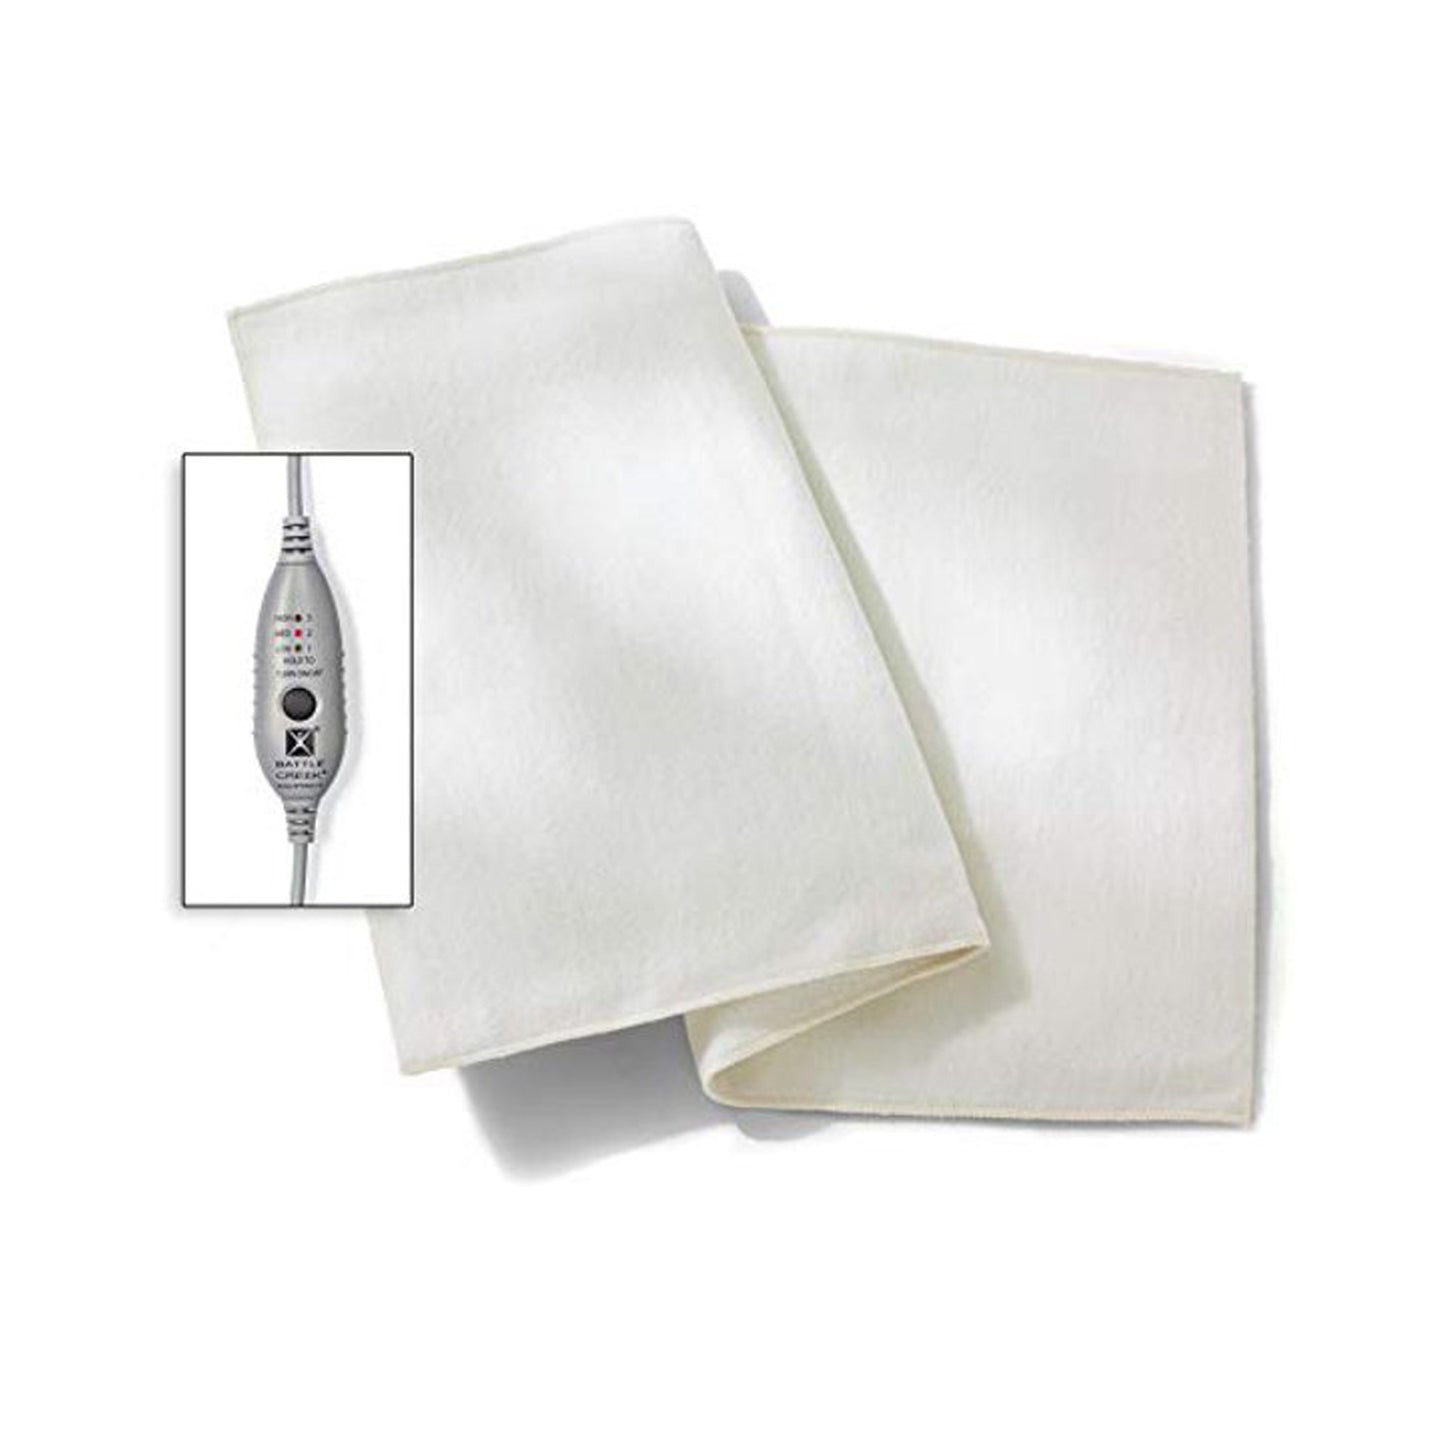 Thermophore® MaxHEAT™ Moist Heating Pad for Backs, Hips, Legs and Shoulders